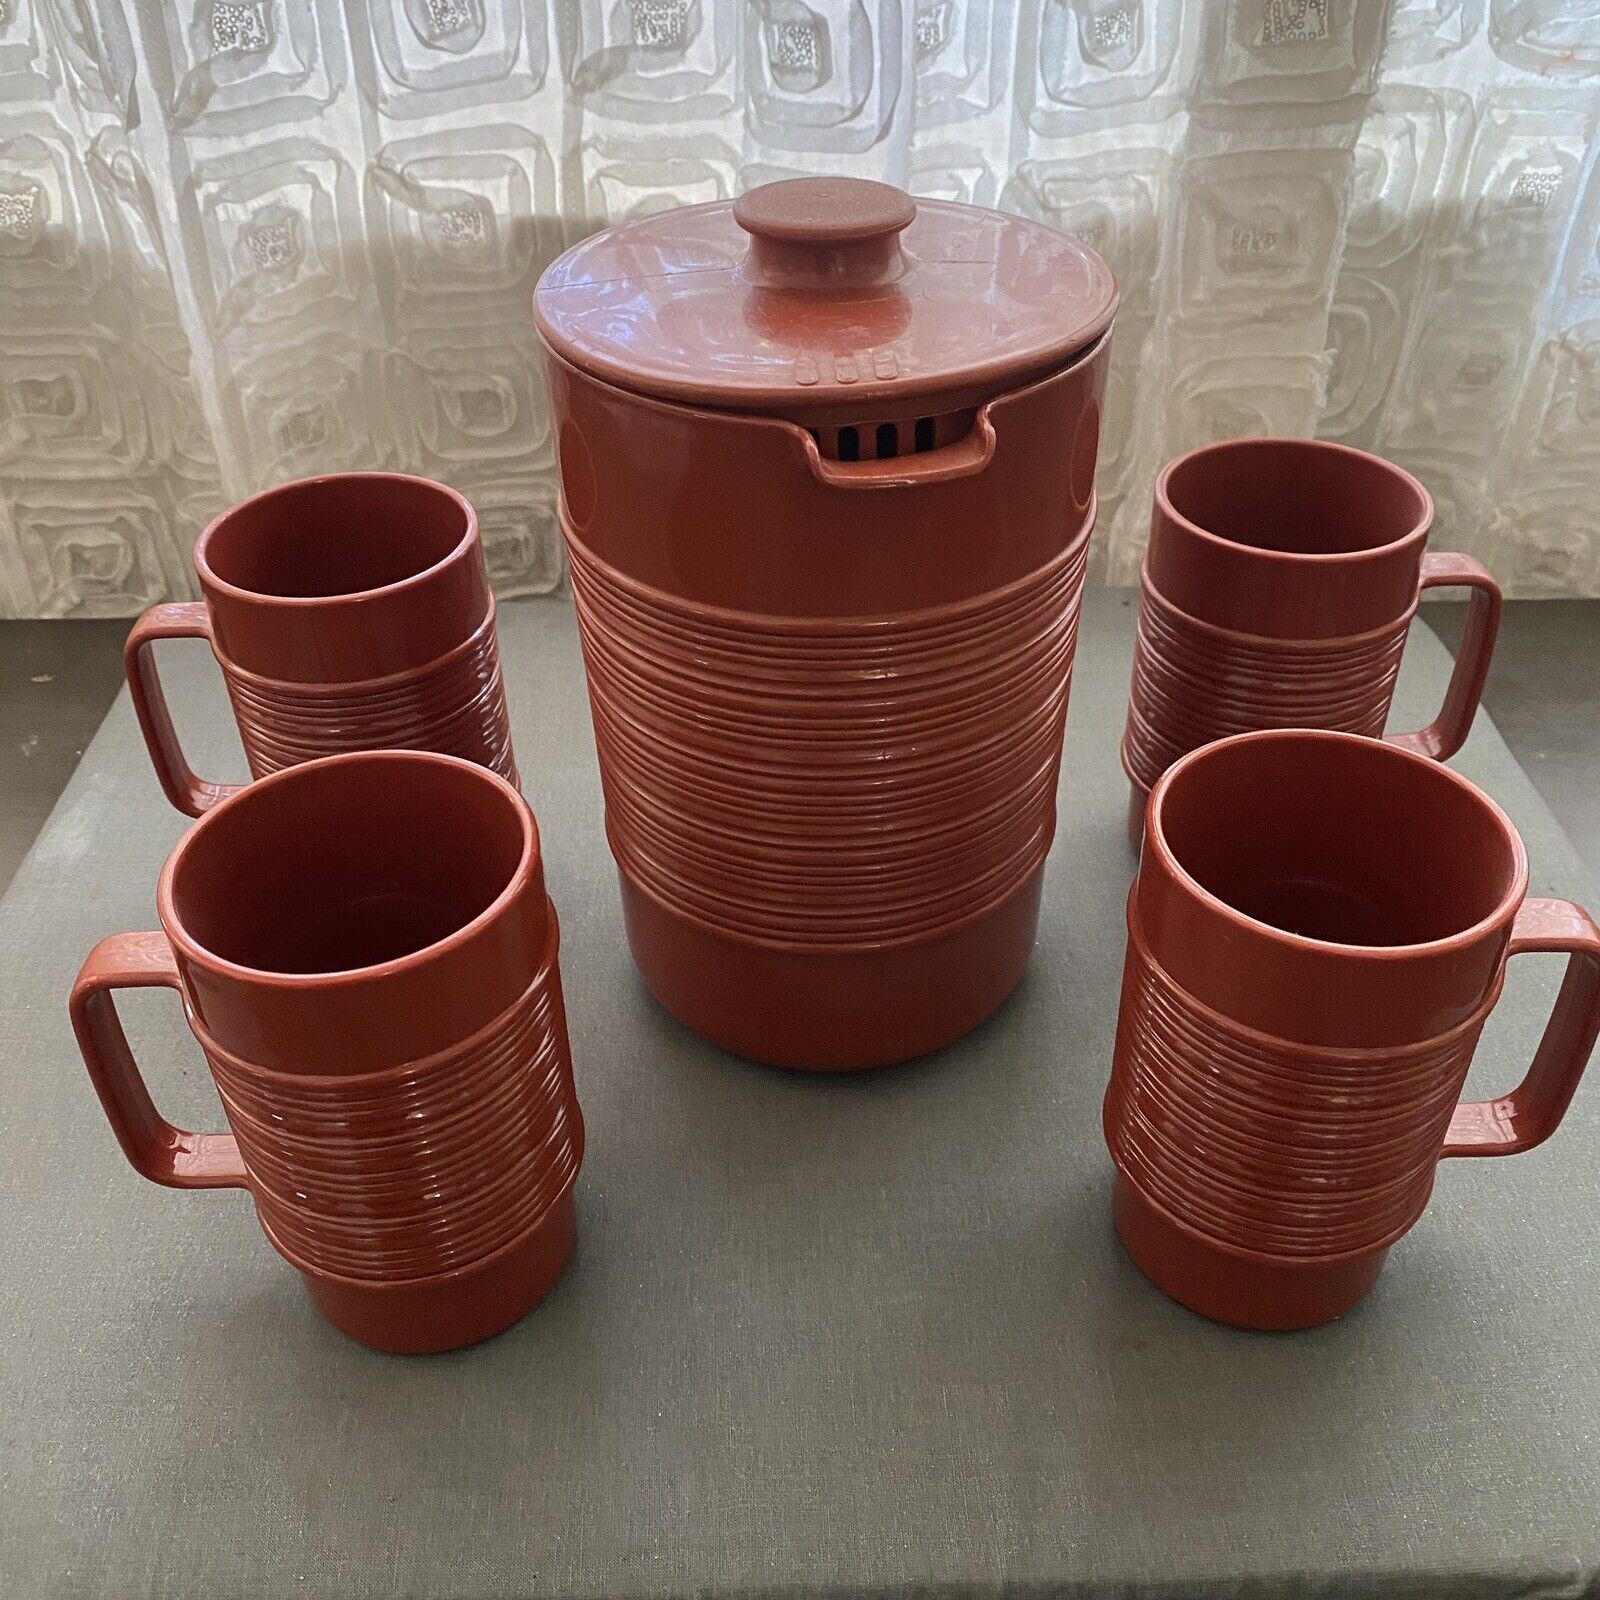 Vintage Rubbermaid Ribbed Pitcher and Mug Set Rust Colored Plastic 2678 and 3829